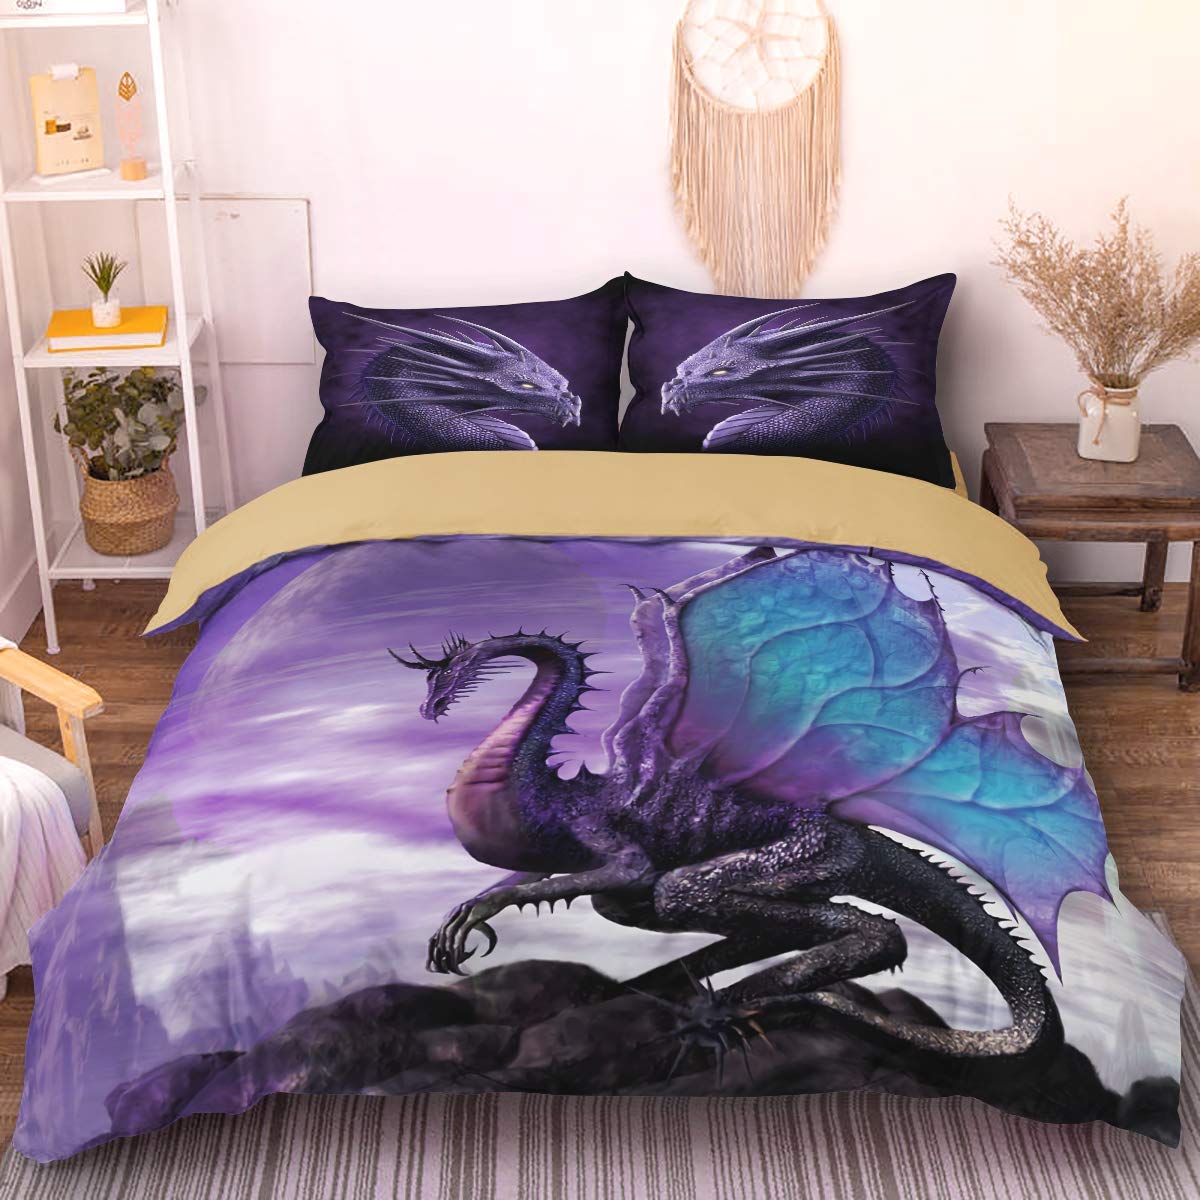 Flying Dragon Duvet Cover with 2 Pillowcases 3D Printed Dragon Bedding Set with Zipper Closure Soft Microfiber Double Duvet Cover Set 200 x 200cm(Purple,Brown)